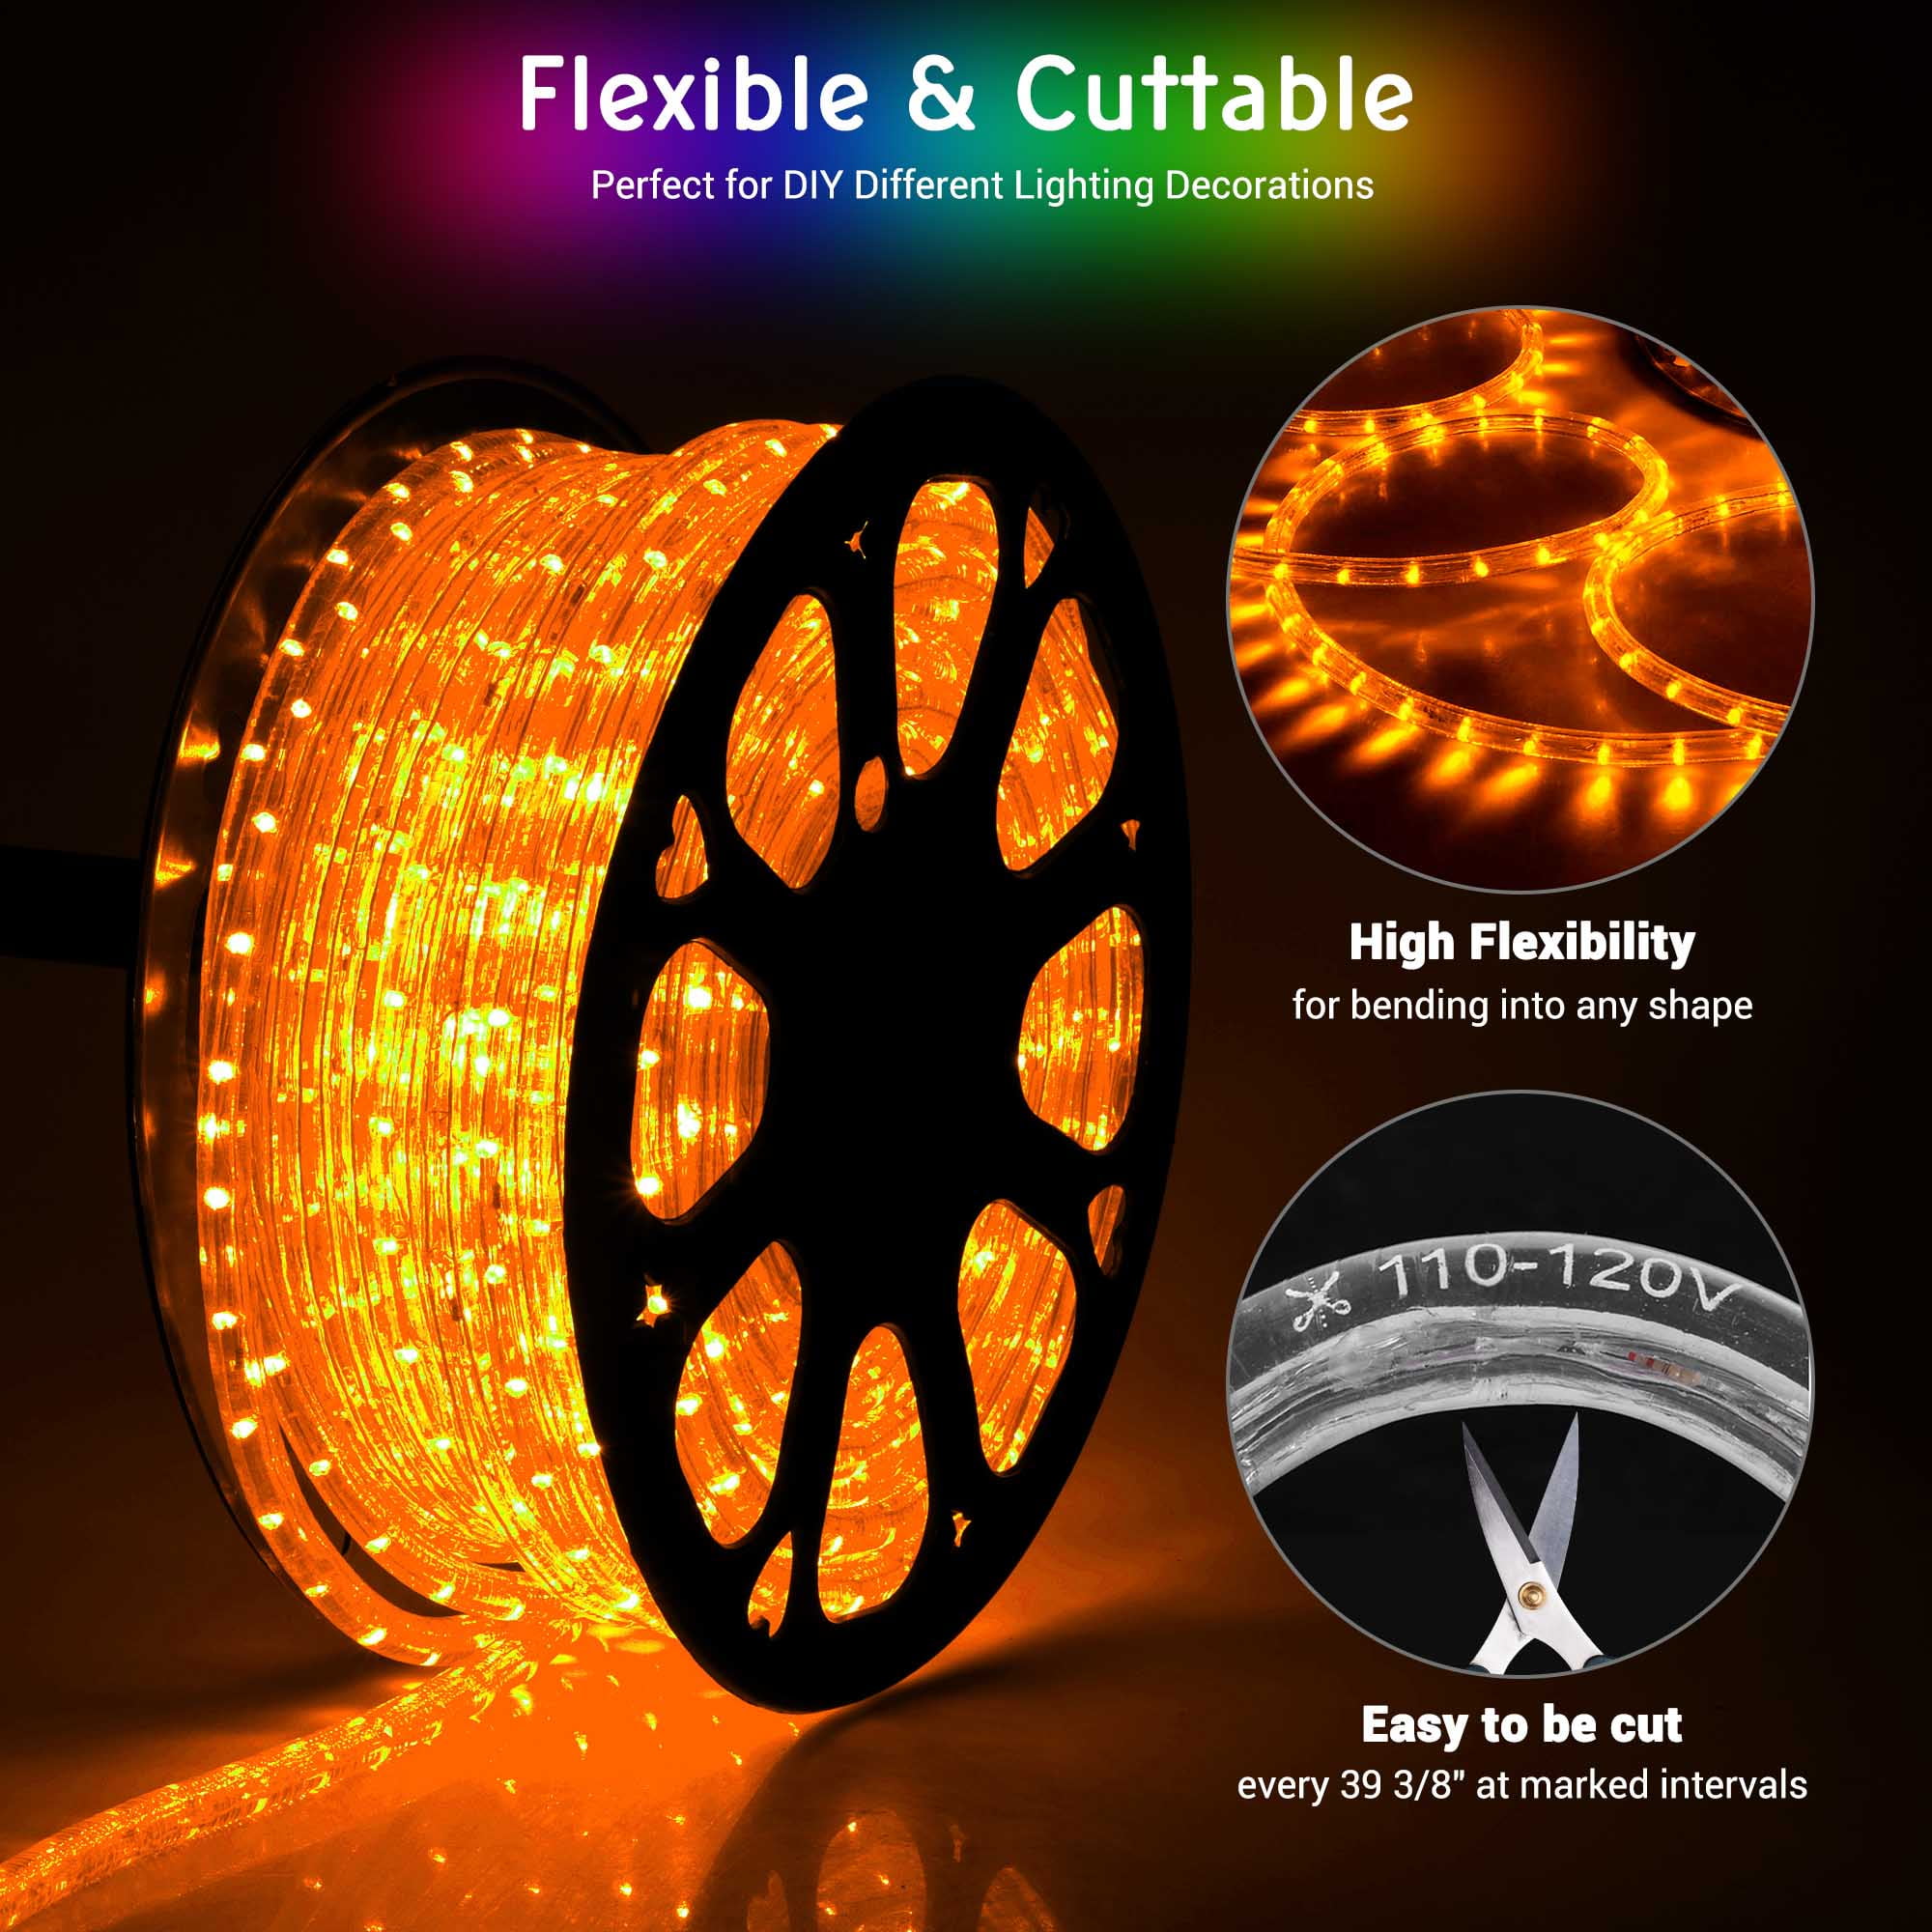 DELight 150Ft Rope Light 1620 LED Waterproof String Lighting Outdoor  Flexible Cuttable 2 Wire Garage Deck Stair Backyard Pool Holiday Wedding  Party Decoration Yellow 